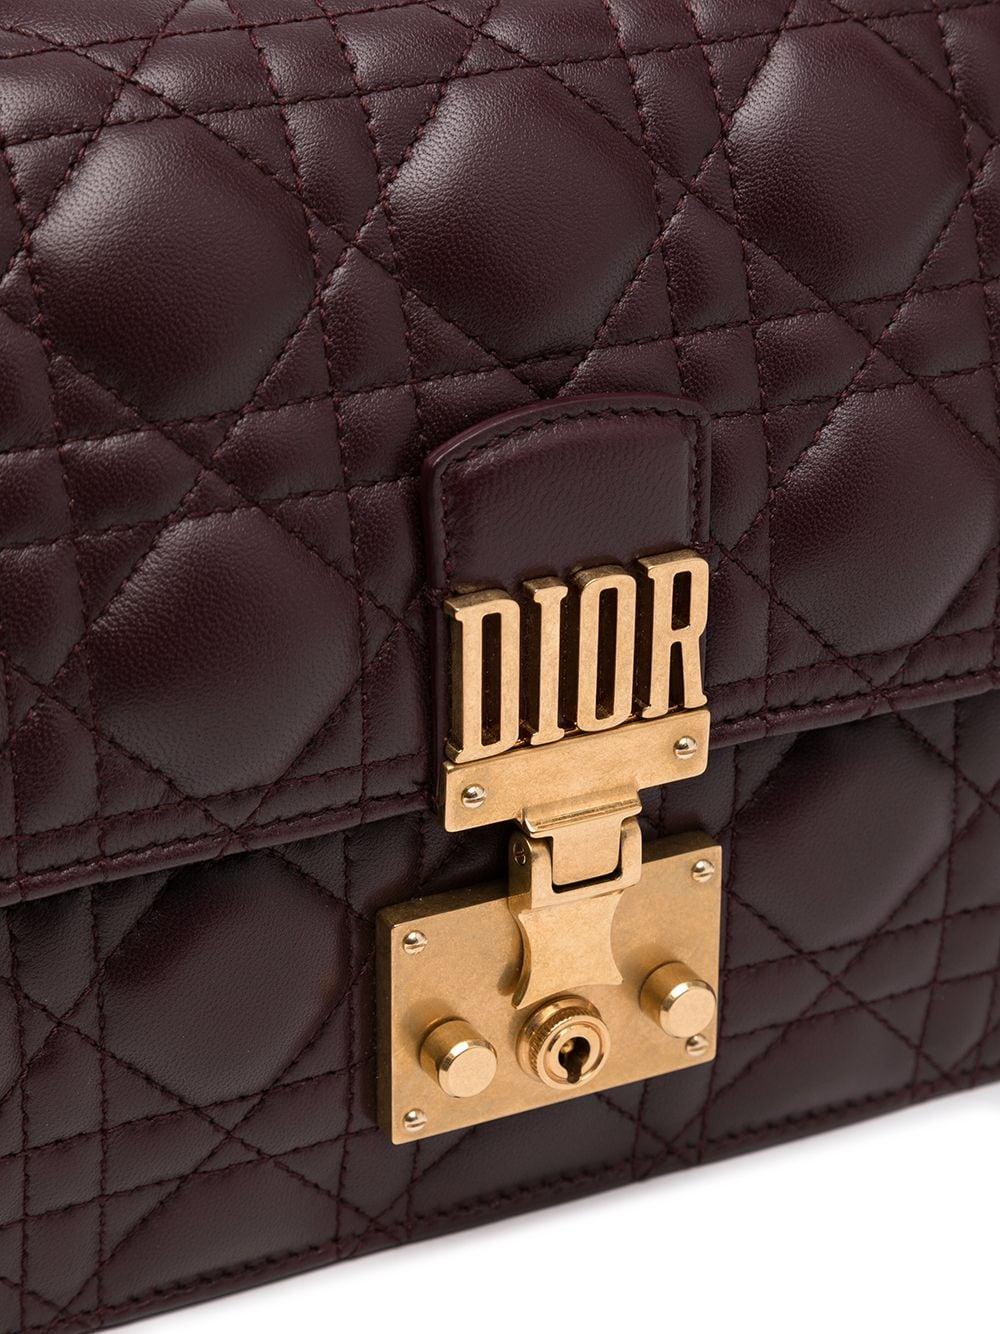 Launched in 2017 under the creative direction of Maria Grazia-Chiuri, the Dioraddict bag is the new it-bag from Dior. Featuring the signature Dior logo in bold lettering, single flap and chain for your every day use. The bag elegantly opens to